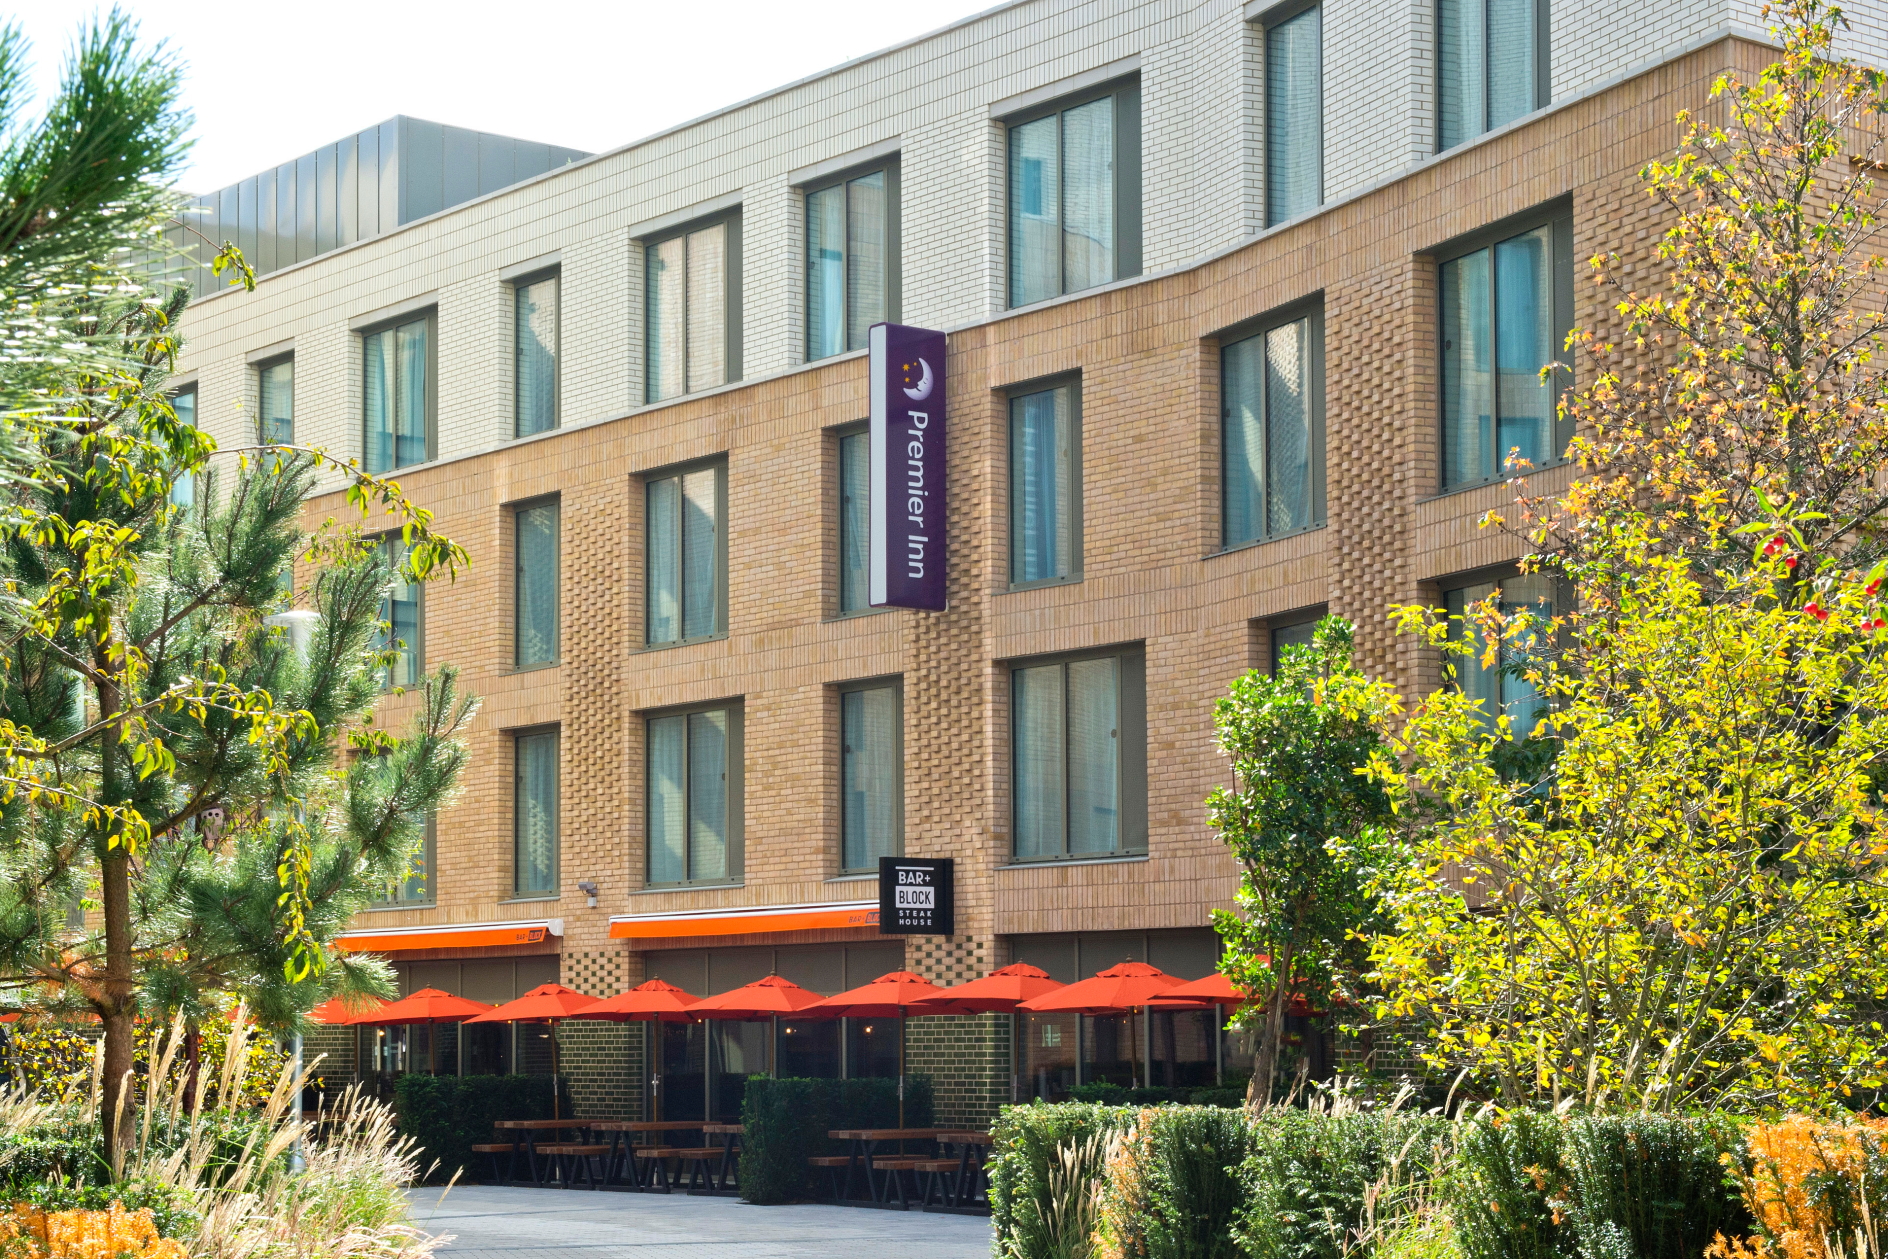 The 274-room Premier Inn off The Cut in Southwark is located between Ufford Street and The Cut in Southwark, just 100 metres from Southwark underground station, a five-minute walk from Waterloo station and near to a range of theatres, bars and restaurants. Click to enlarge.